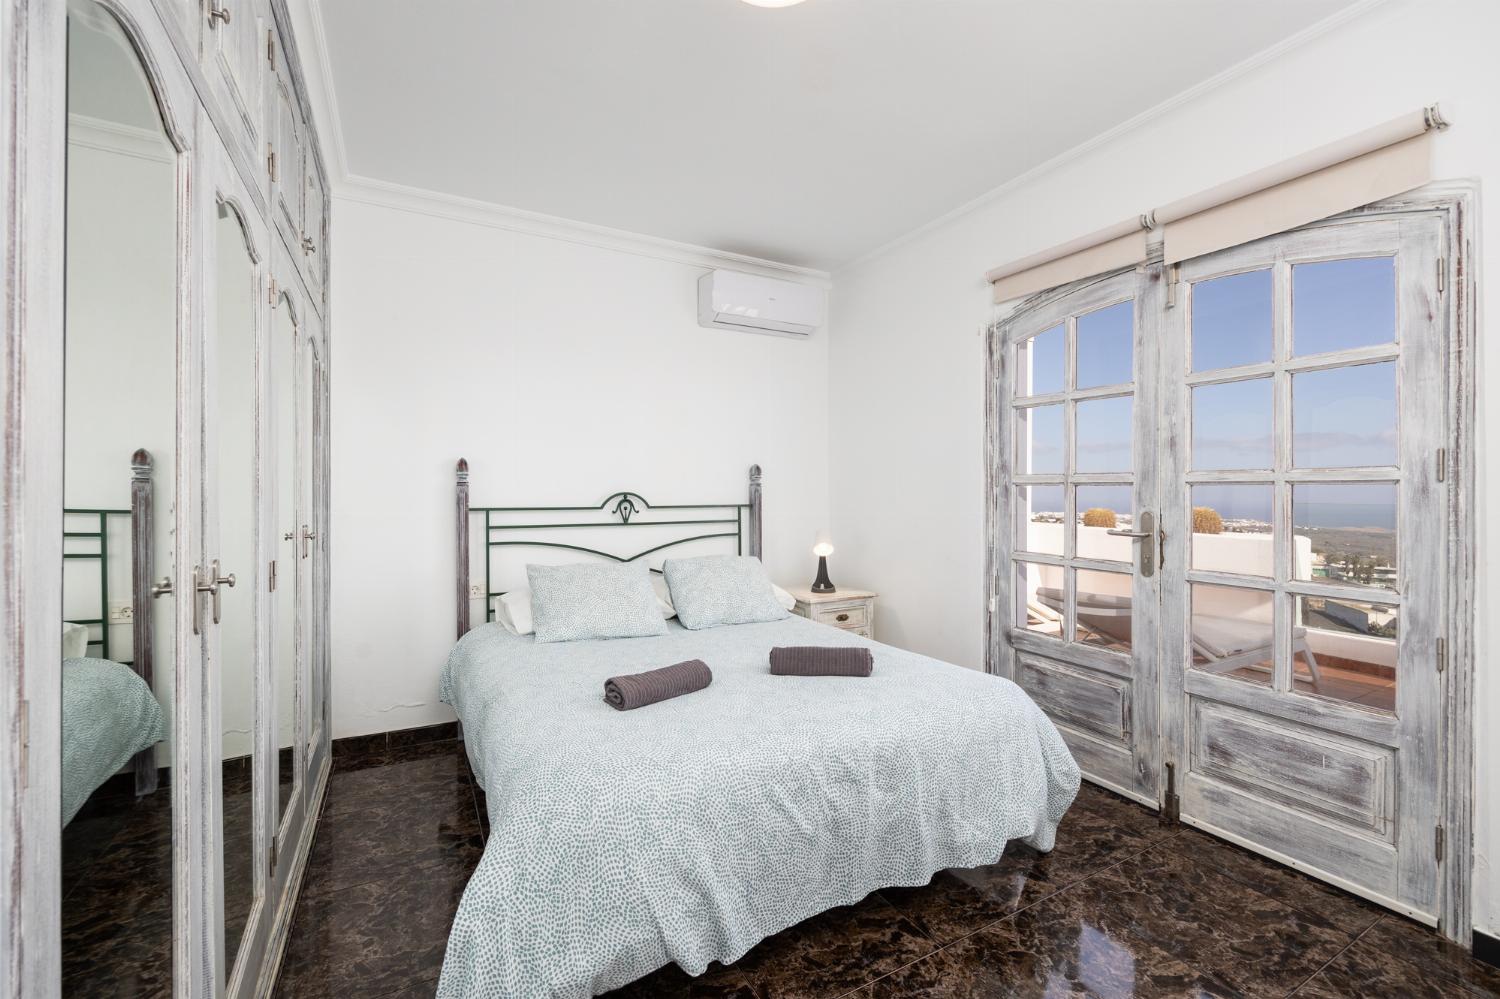 Unit 3: double bedroom with A/C and sea views